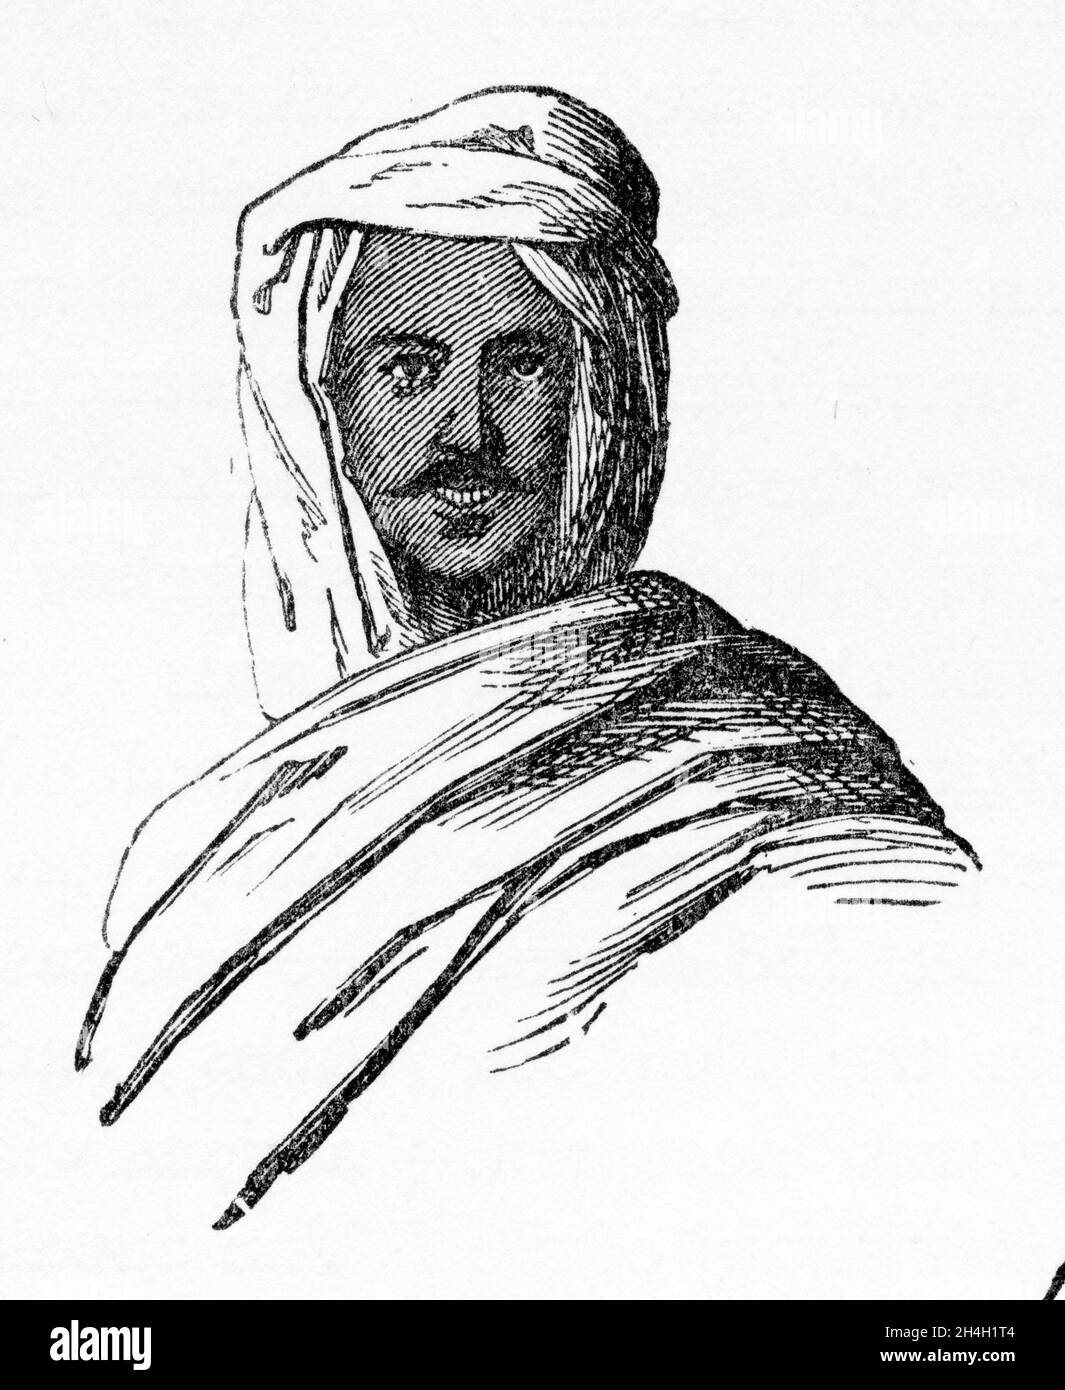 Engraving of Osman Digna (c.1840 – 1926)  follower of Muhammad Ahmad, the self-proclaimed Mahdi, in Sudan, who became his best known military commander during the Mahdist War. He is descendant from the Abbasid family. As the Mahdi's ablest general, he played an important role in the fate of General Charles George Gordon and the loss of the Sudan to Turkish-Egyptian rule. Stock Photo